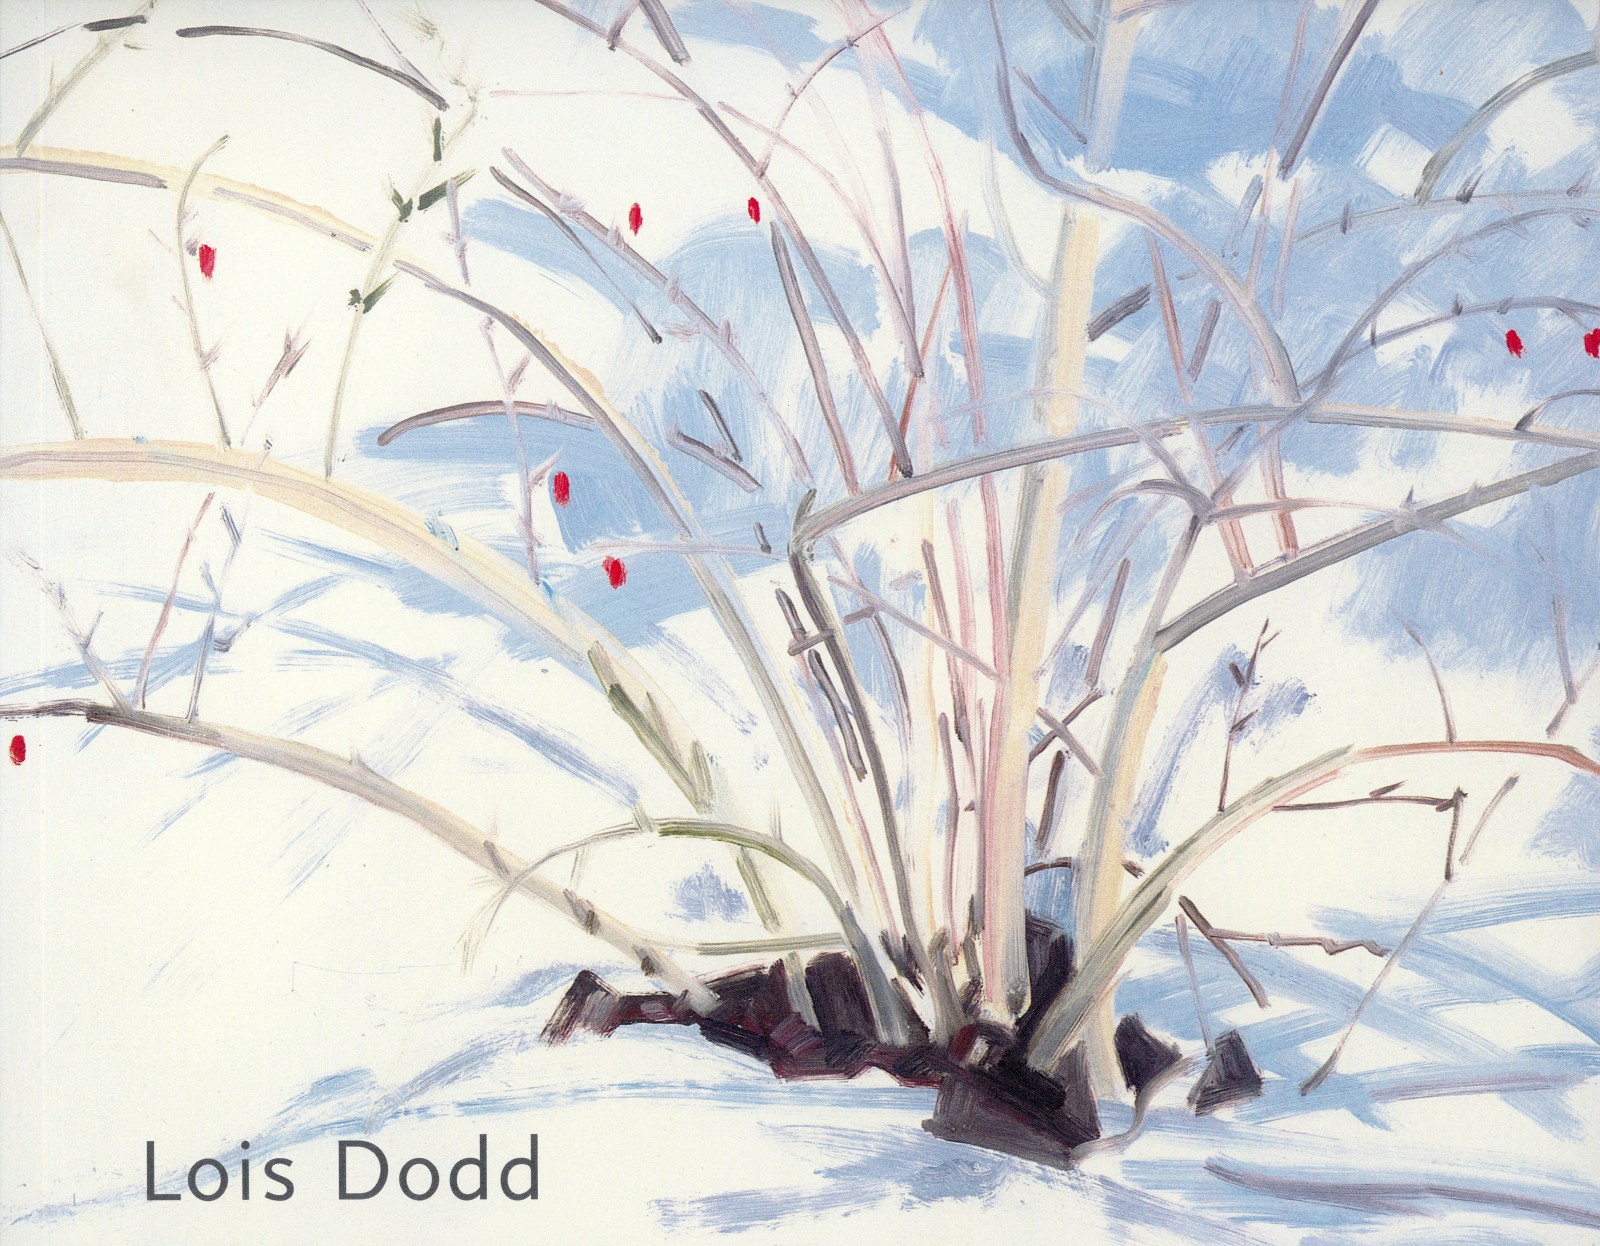 Recent Paintings - Lois Dodd - Catalogues - Alexandre Gallery